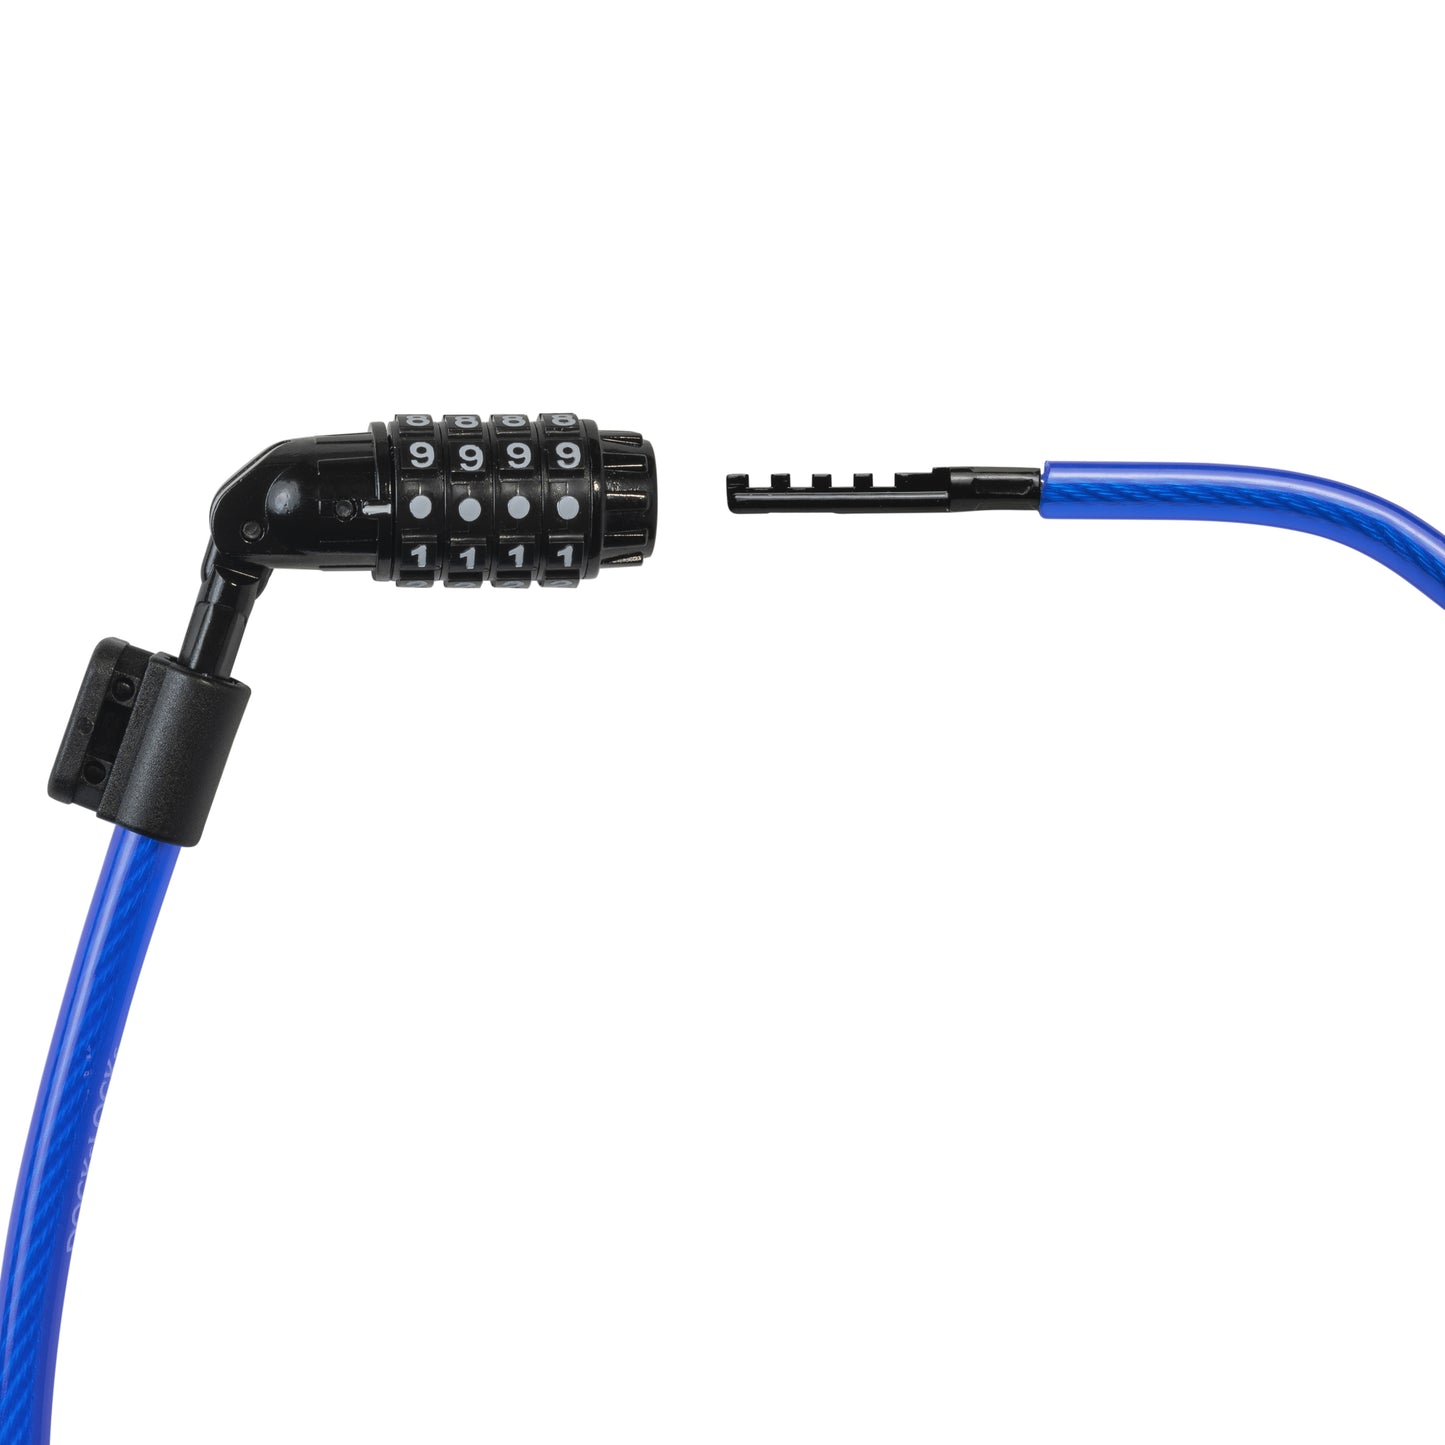 DocksLocks® Bike and Scooter Straight Security Cable Lock with Resettable Combination and Mounting Bracket (2' or 4')